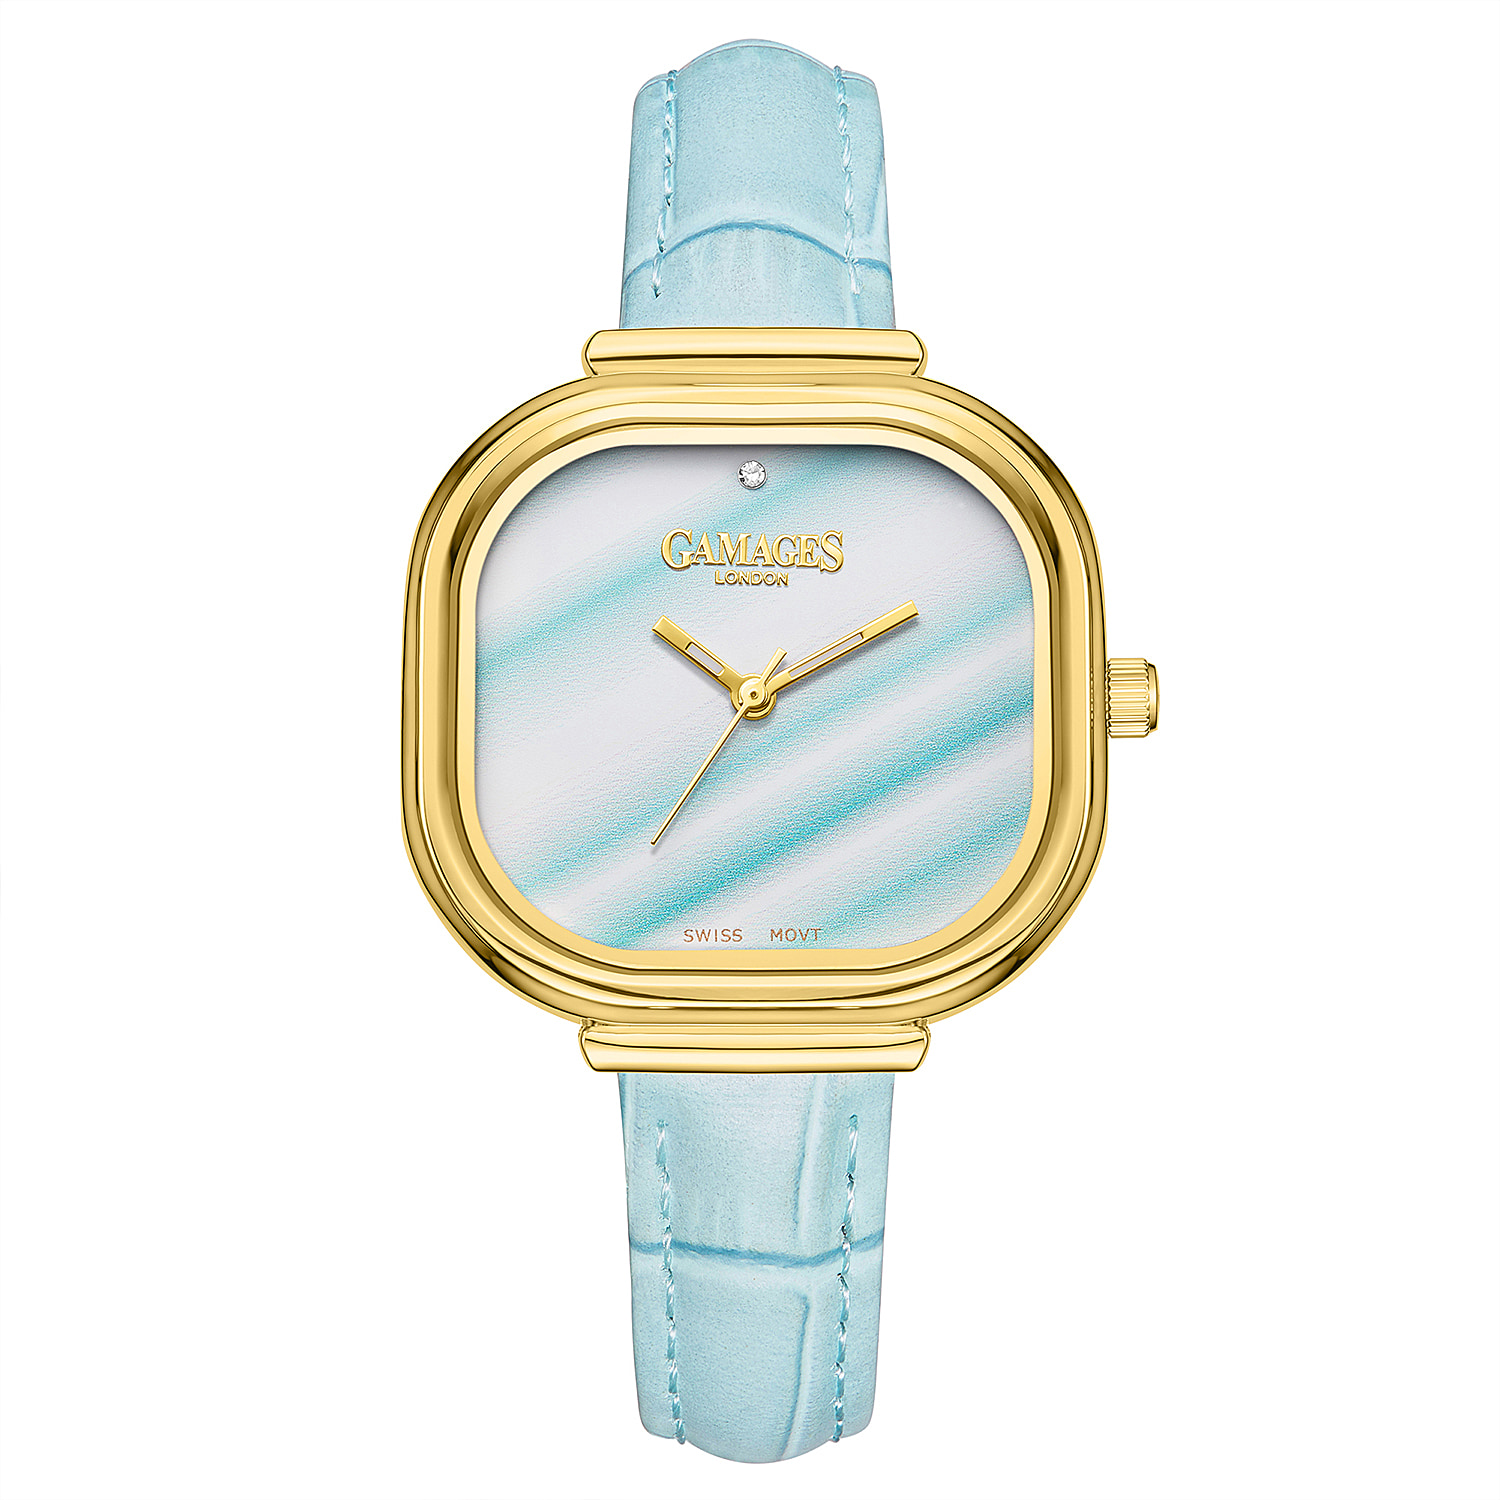 Gamages Of London Limited Mirror Diamond Swiss Quartz Movt. 30m Water Resistant Ladies Watch with Teal Leather Strap